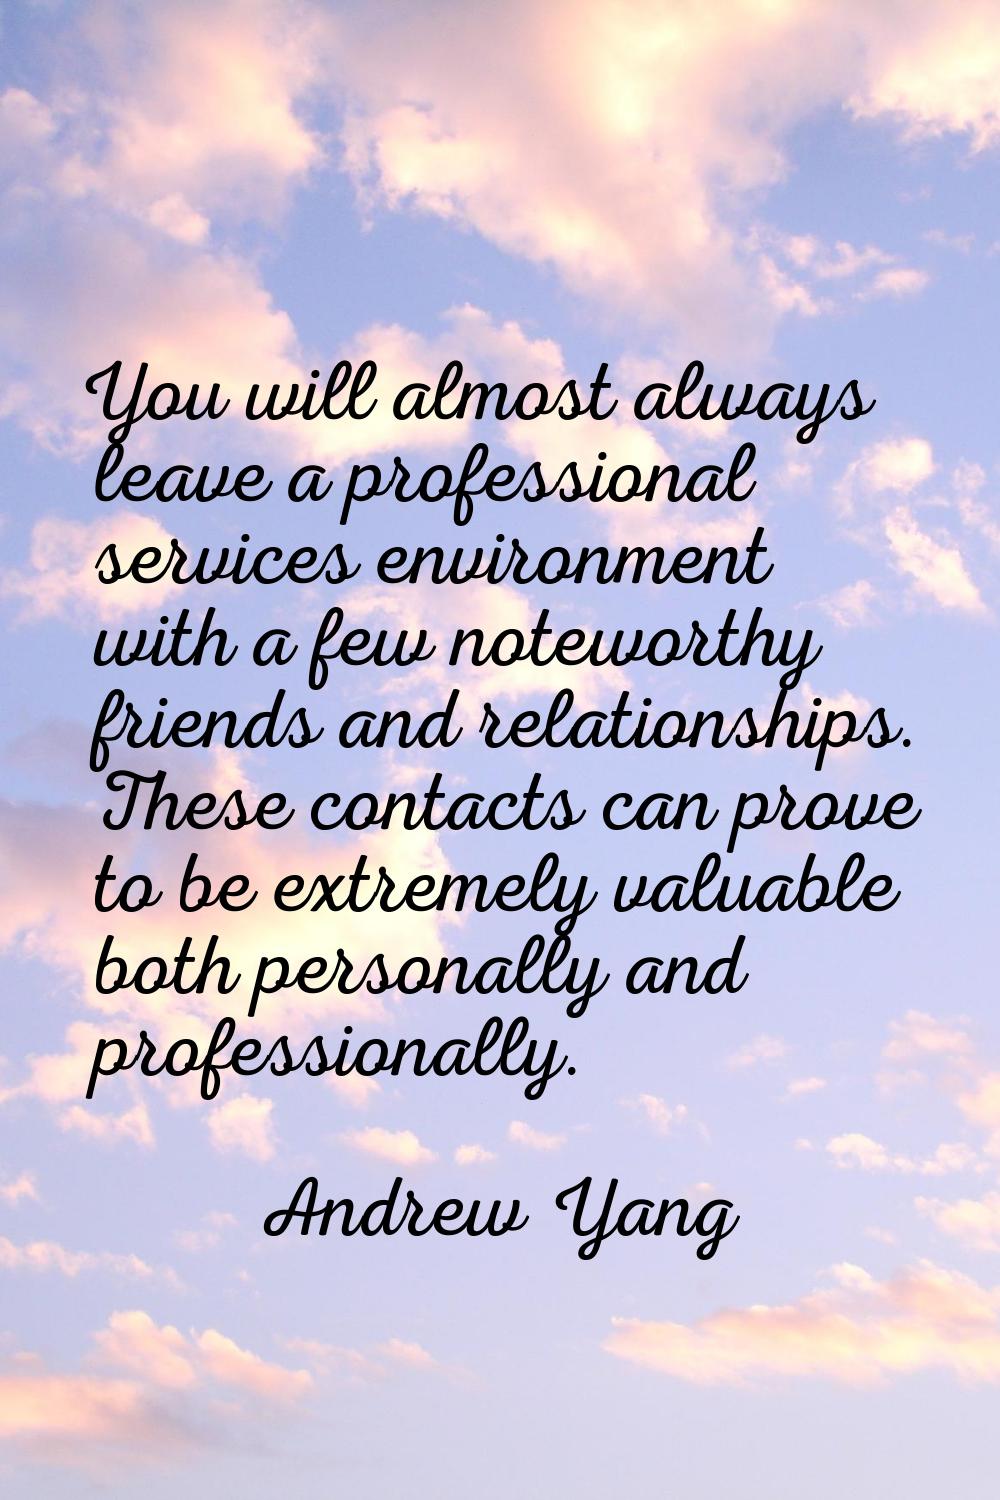 You will almost always leave a professional services environment with a few noteworthy friends and 